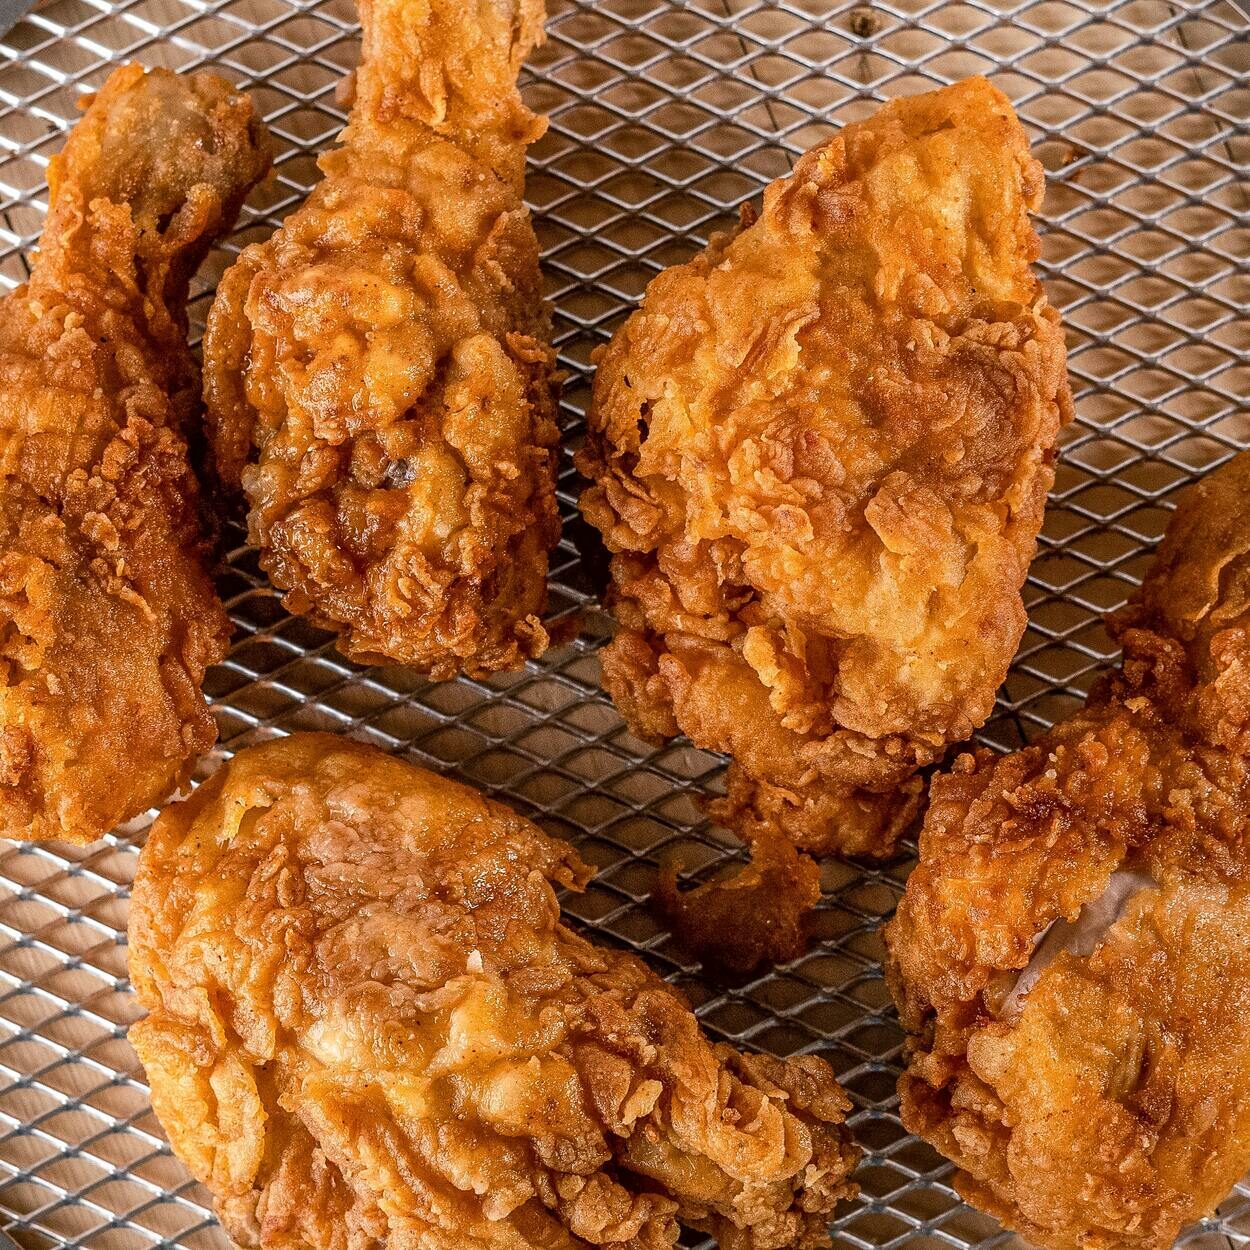 The crispy and crunchy air fried chicken. 